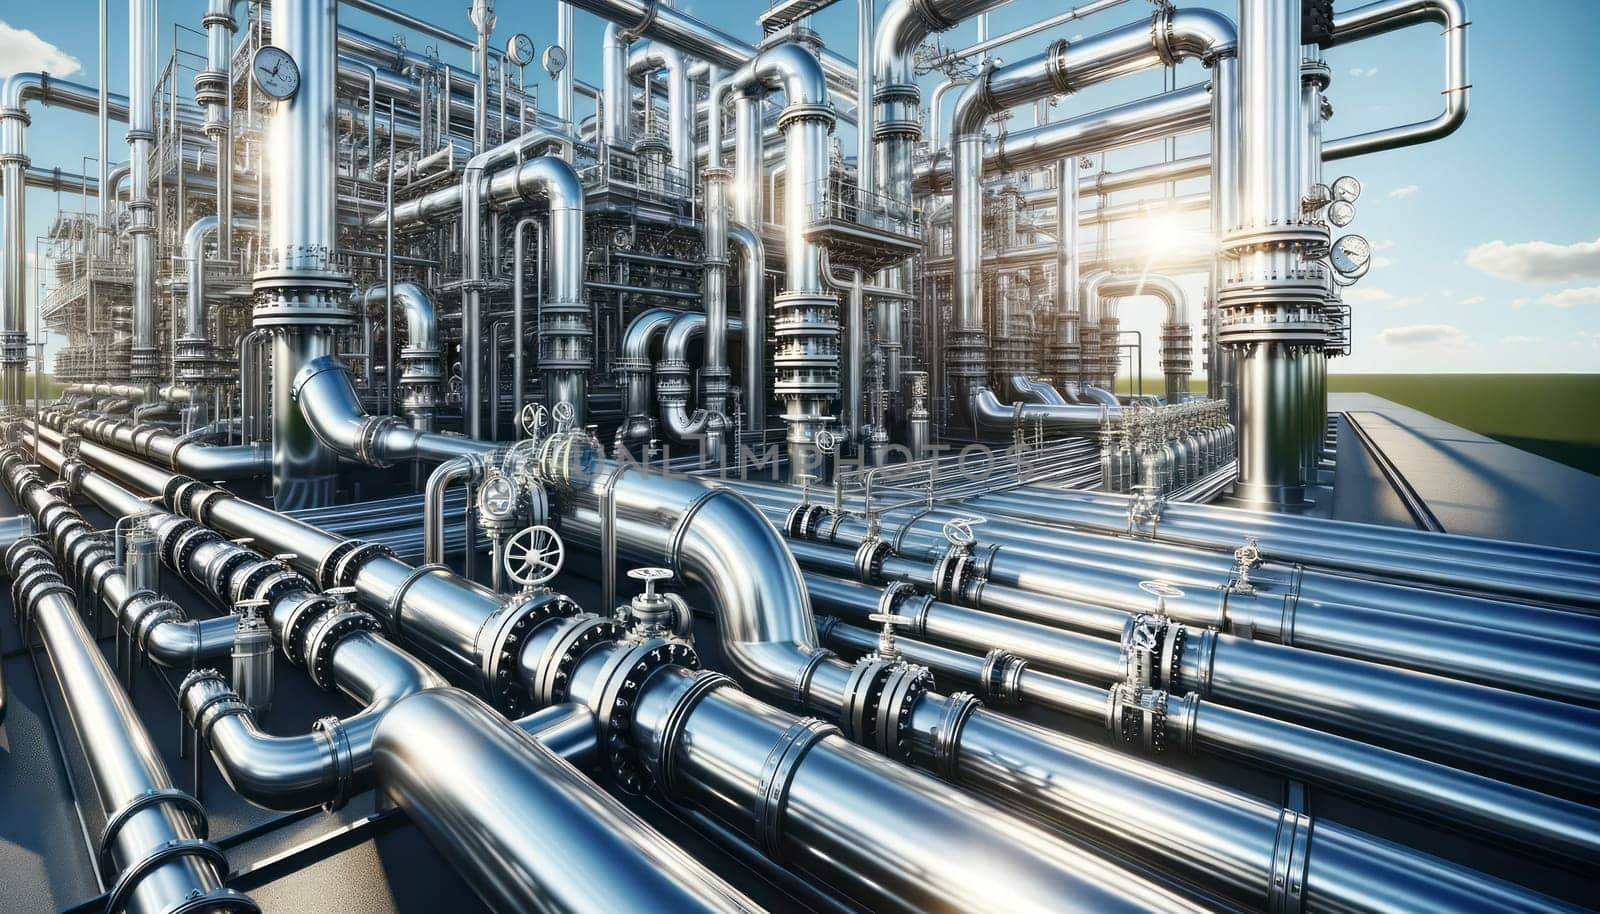 A digital illustration of a complex network of industrial pipes at a processing plant. The image showcases shiny metal pipes with various diameters interconnected and running in different directions. Valves and pressure meters are visible on the pipes, indicating control points in the system. The infrastructure is set against a clear blue sky with a few clouds, suggesting an open-air environment. The sun casts highlights and shadows on the metal surfaces, giving the pipes a gleaming appearance. This scene represents a high-tech, clean energy facility.